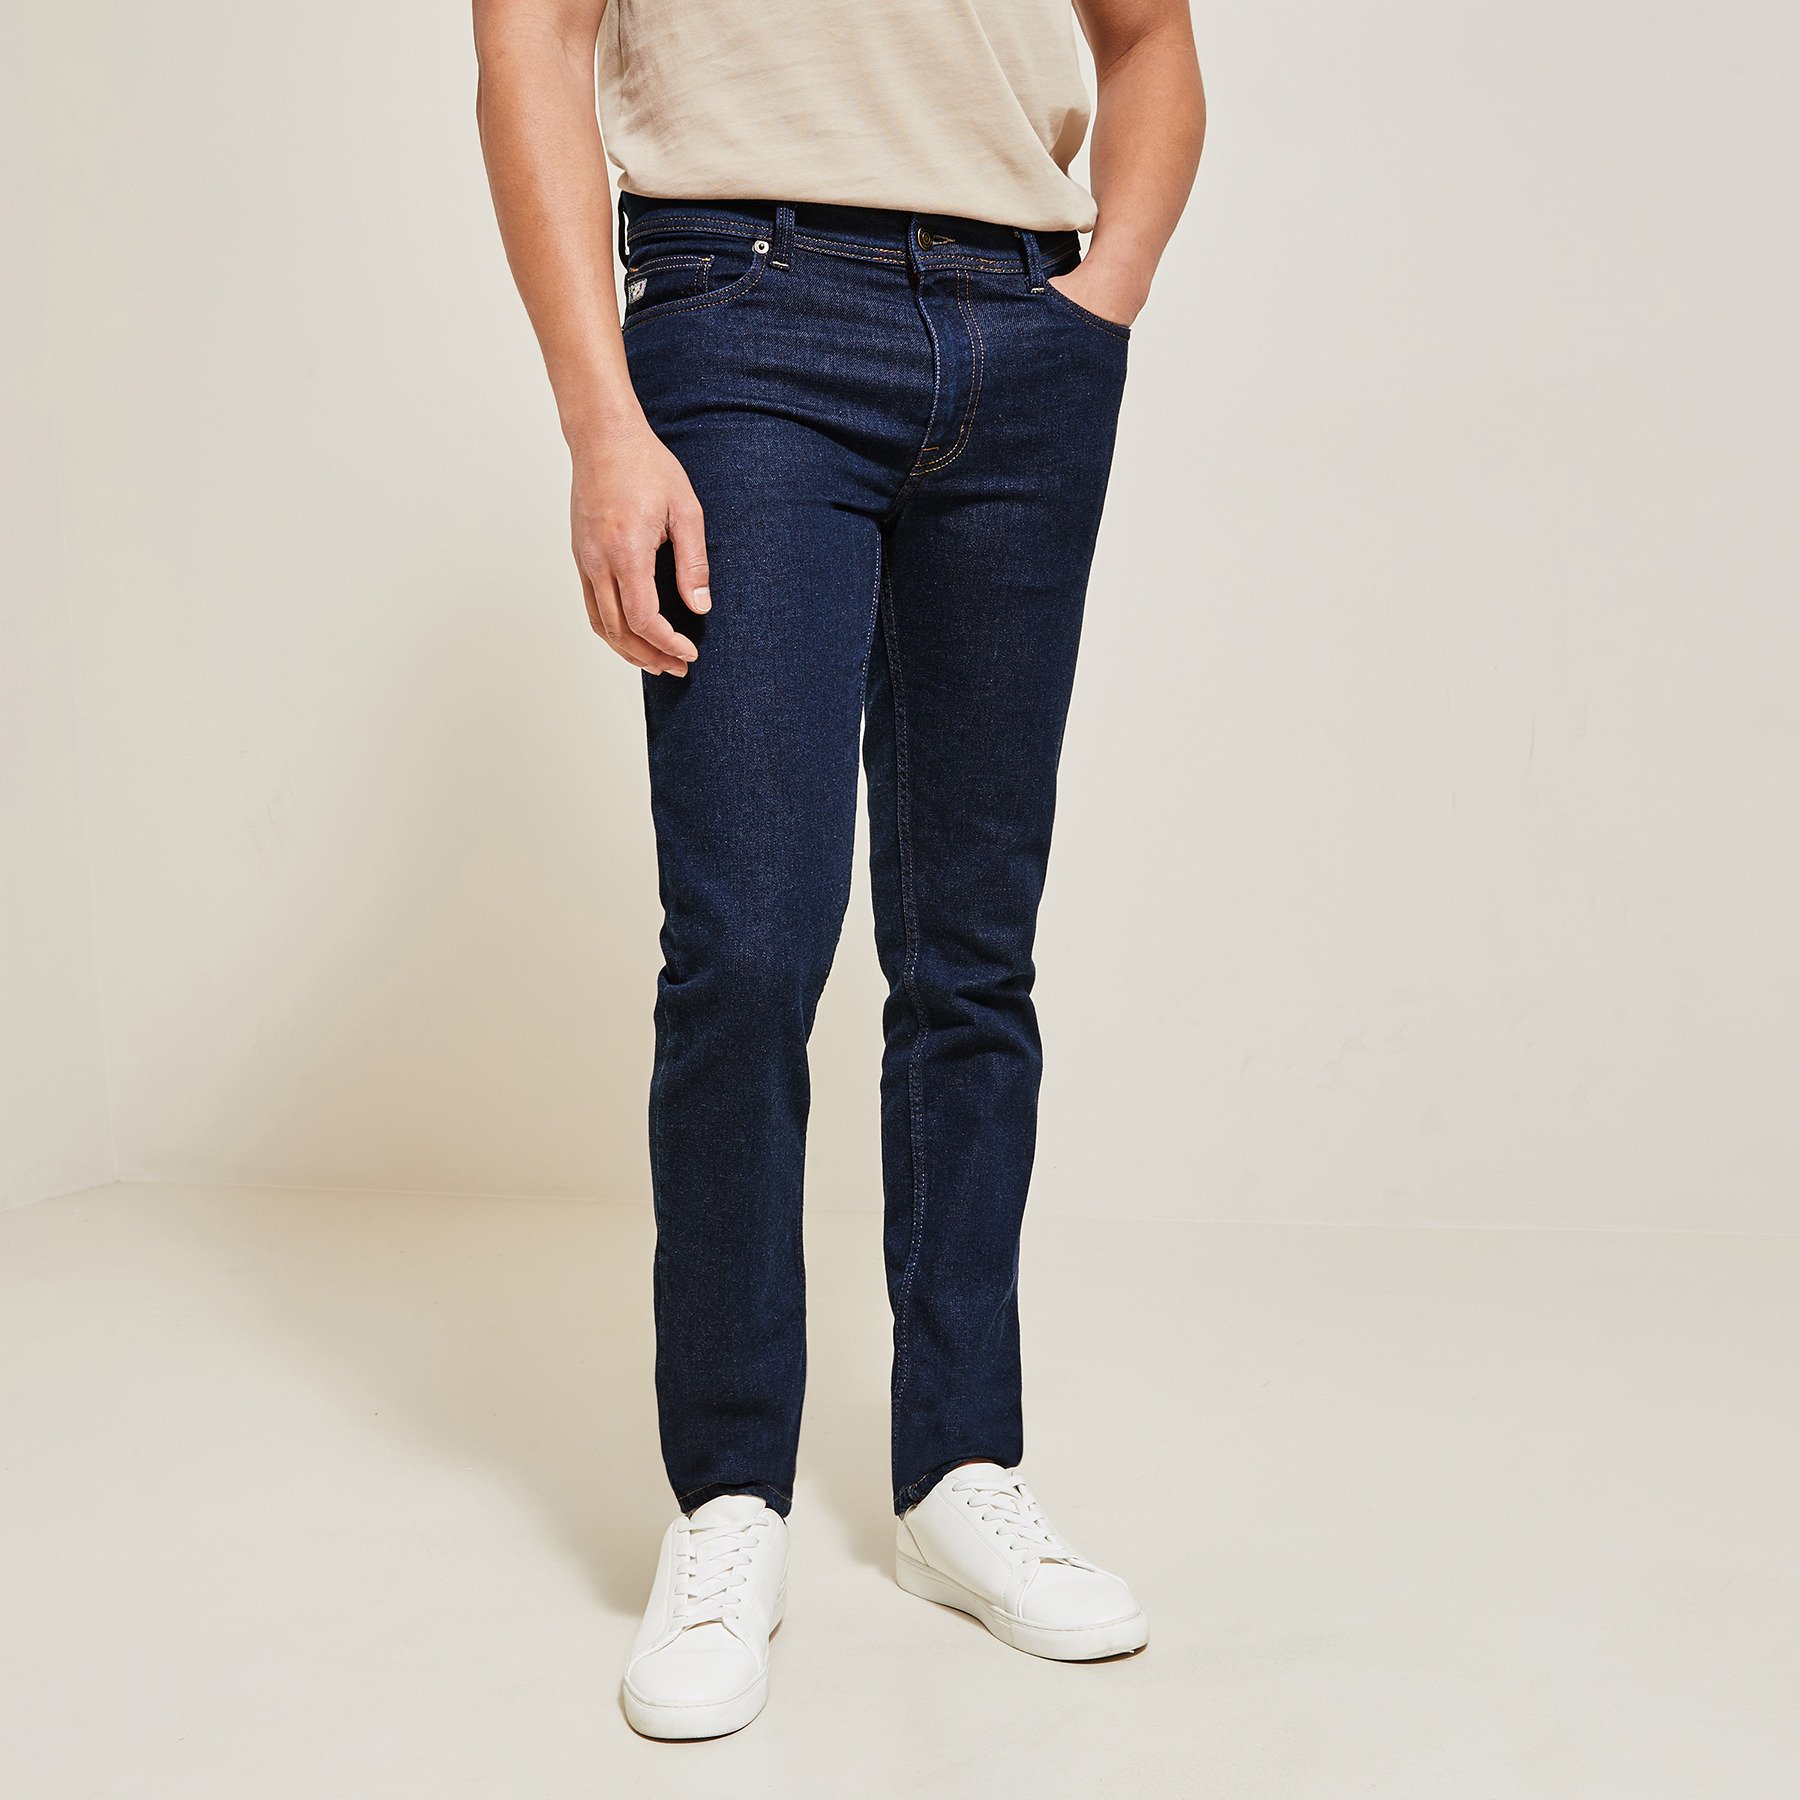 Jean straight cinq neuf édition n°3 Made in France Bleu 36 96% Coton, 4% Elasthanne Homme